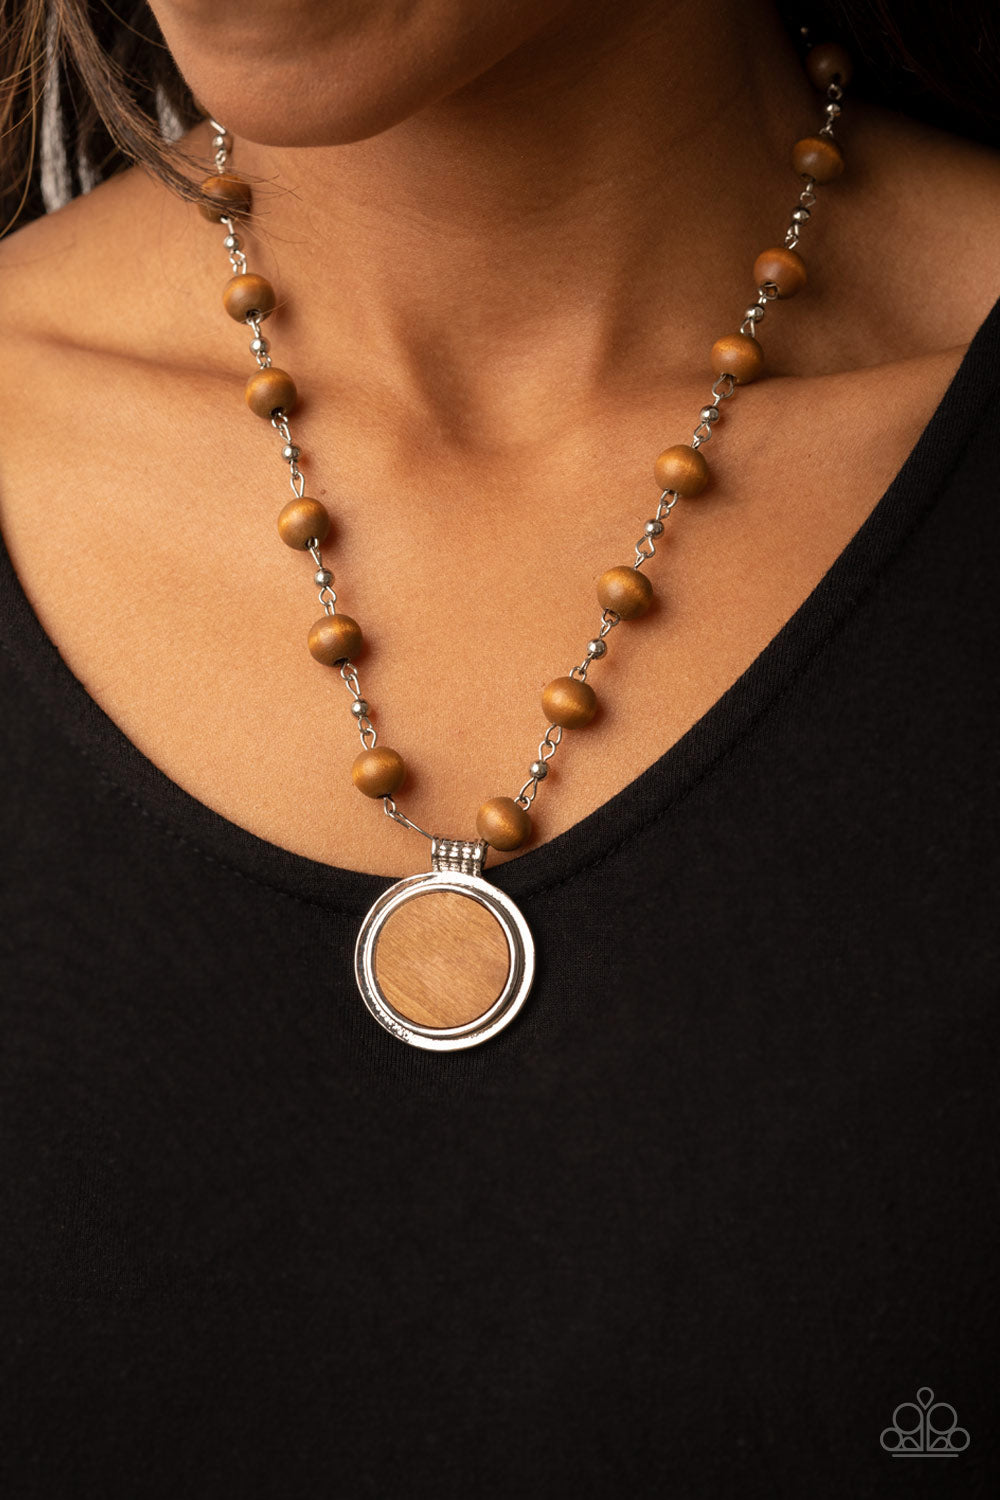 Soulful Sunrise Brown Necklace - Paparazzi Accessories  Infused with dainty silver chains, a collection of brown wooden beads link into an earthy chain below the collar. Featuring a textured silver fitting, a flat wooden disc is pressed into a silver frame, resulting in a naturally refined pendant. Features an adjustable clasp closure.  Sold as one individual necklace. Includes one pair of matching earrings.